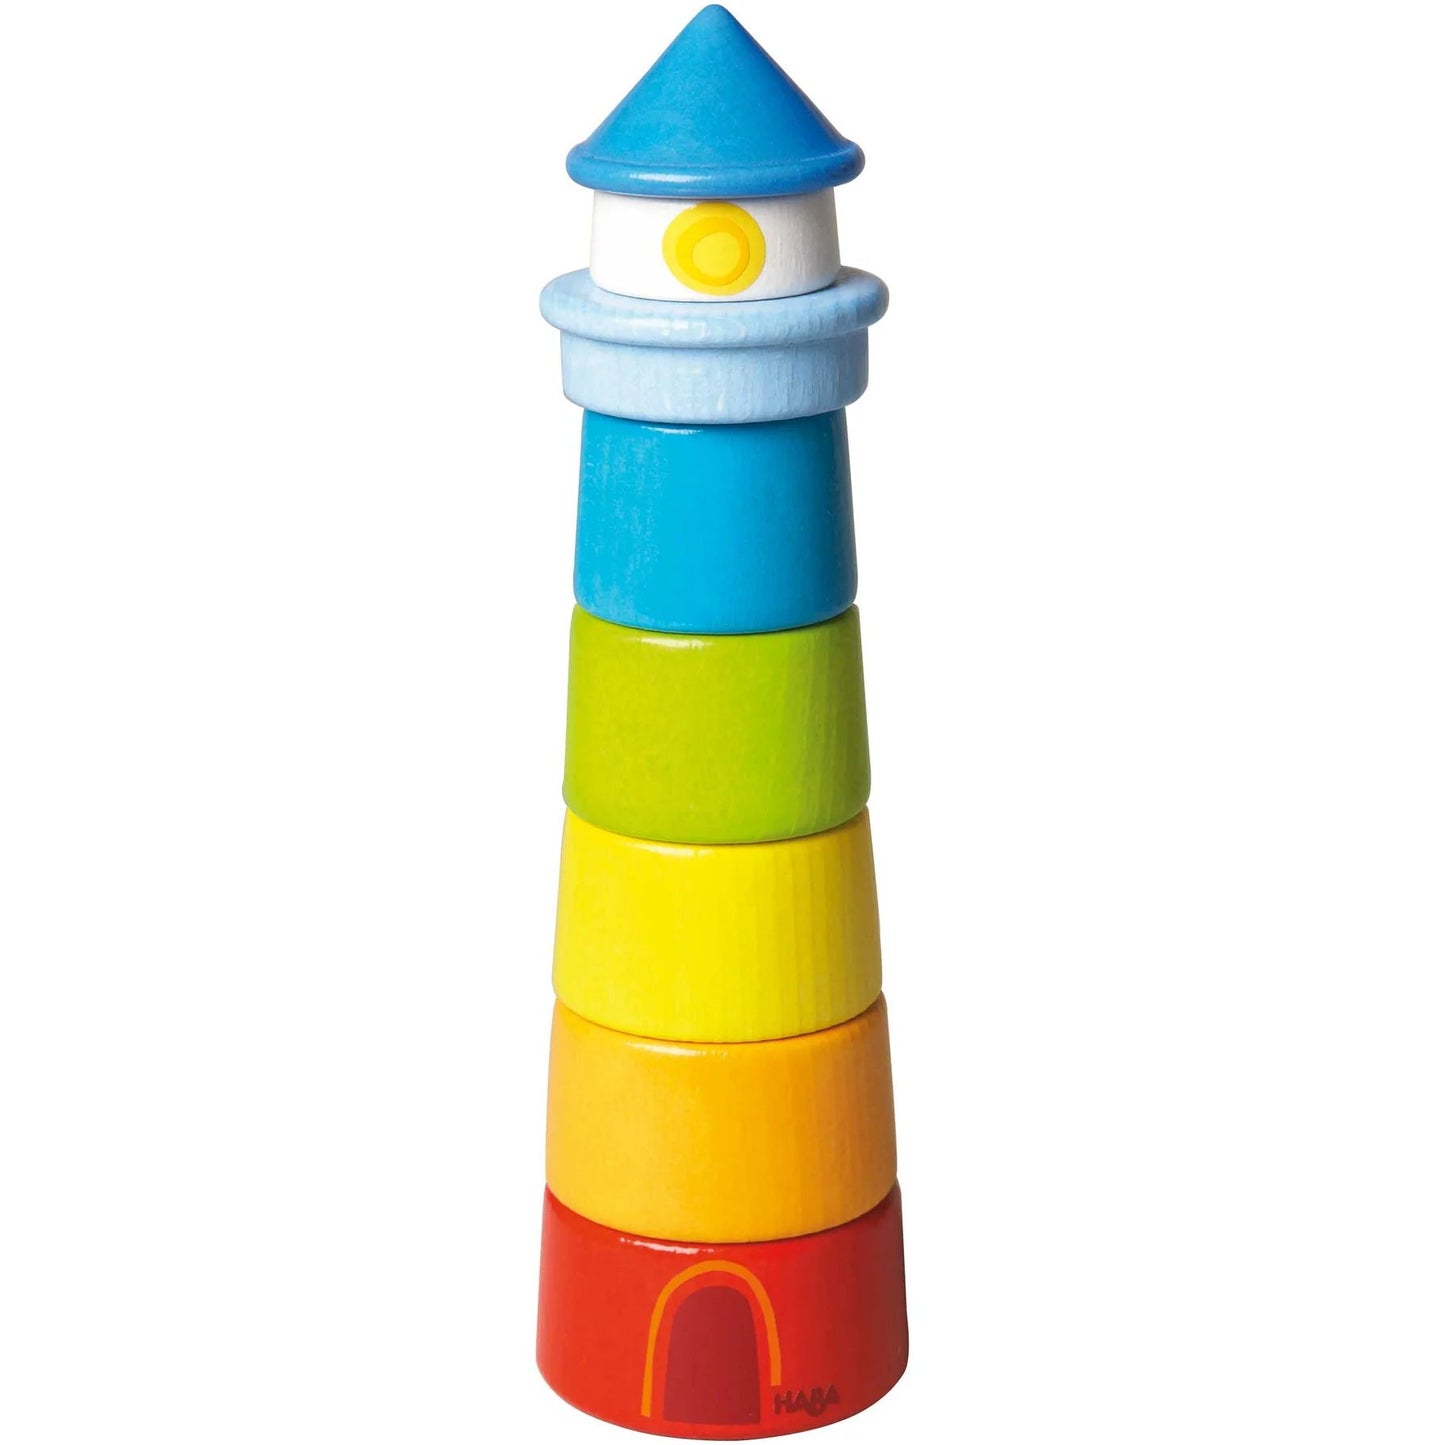 Haba Colorful Stacking Lighthouse by Haba - blueottertoys-HB300170